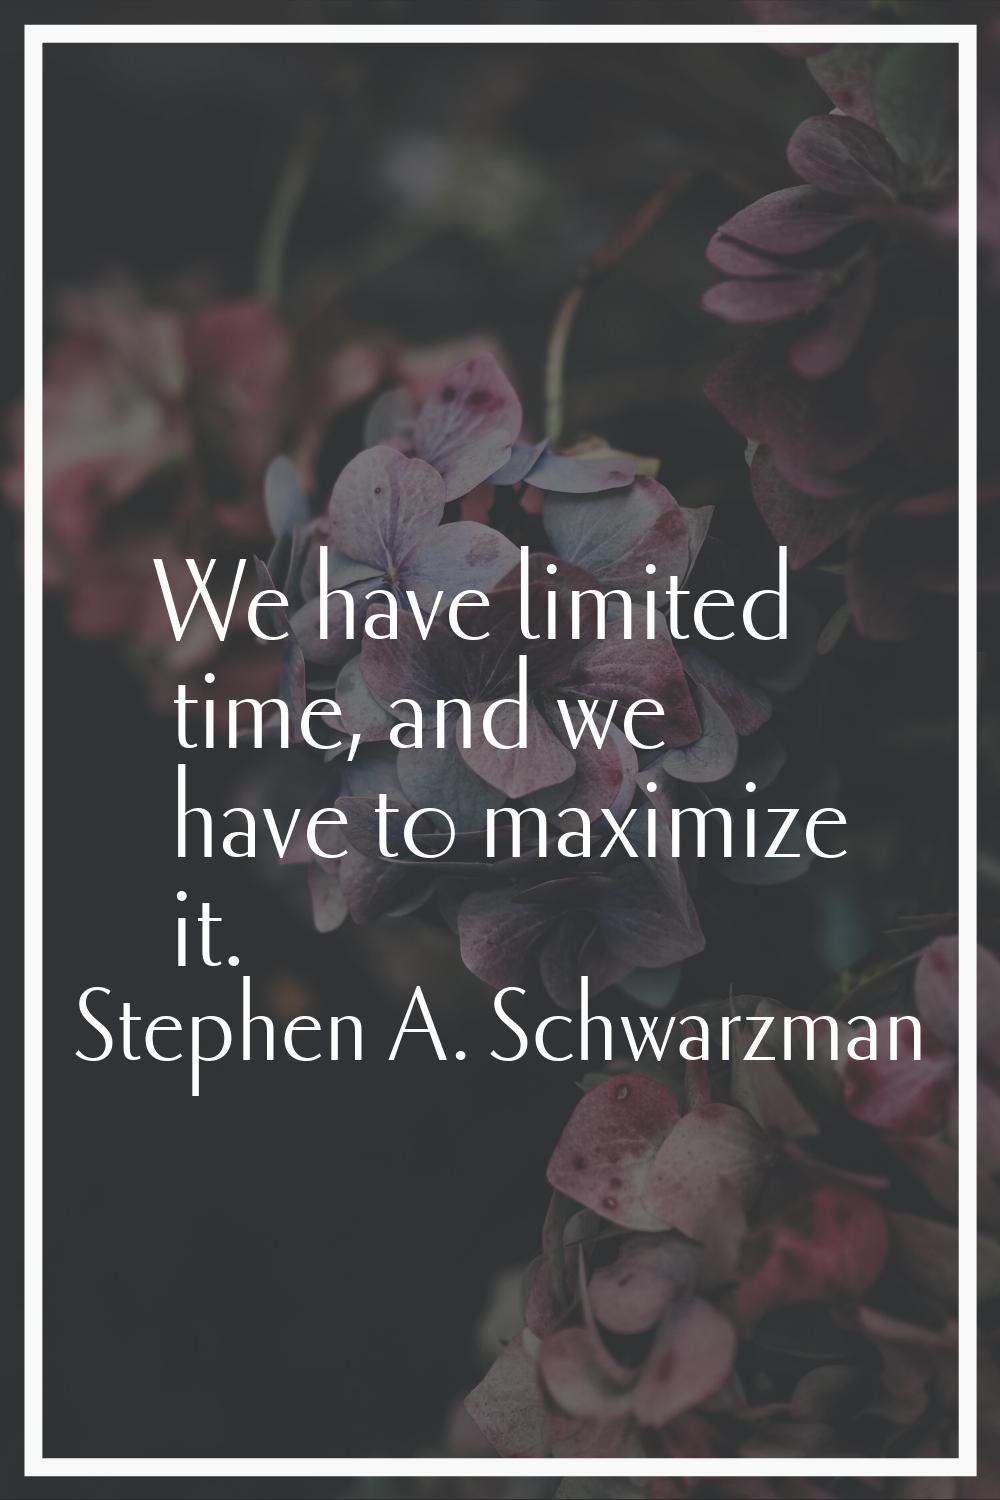 We have limited time, and we have to maximize it.